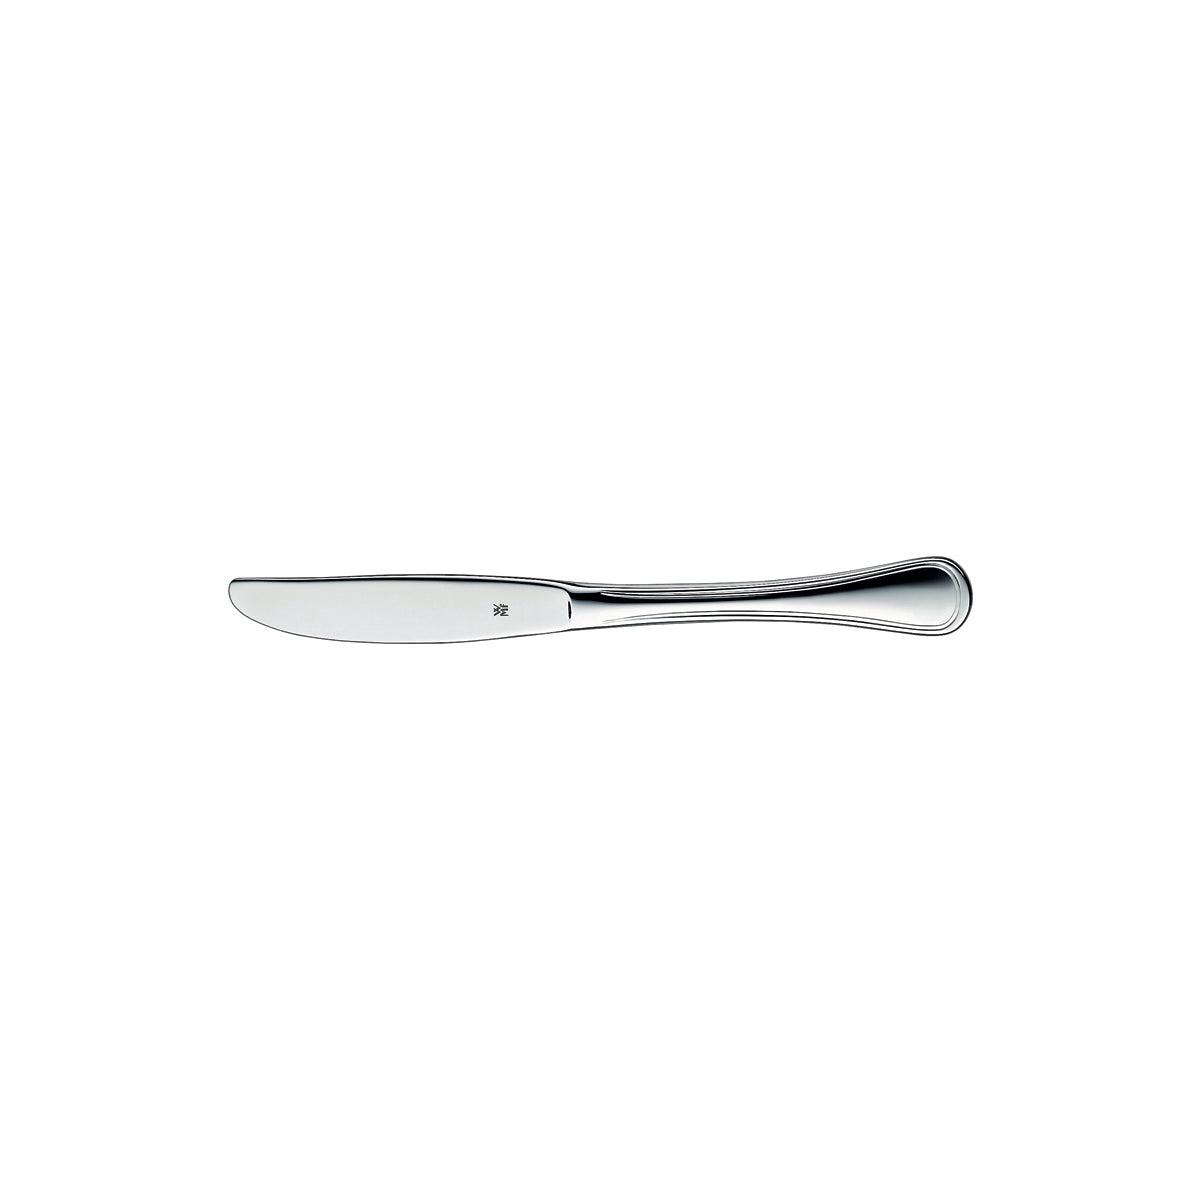 12.0203.6047 WMF Contour Table Knife - Hollow Handle Stainless Steel Tomkin Australia Hospitality Supplies